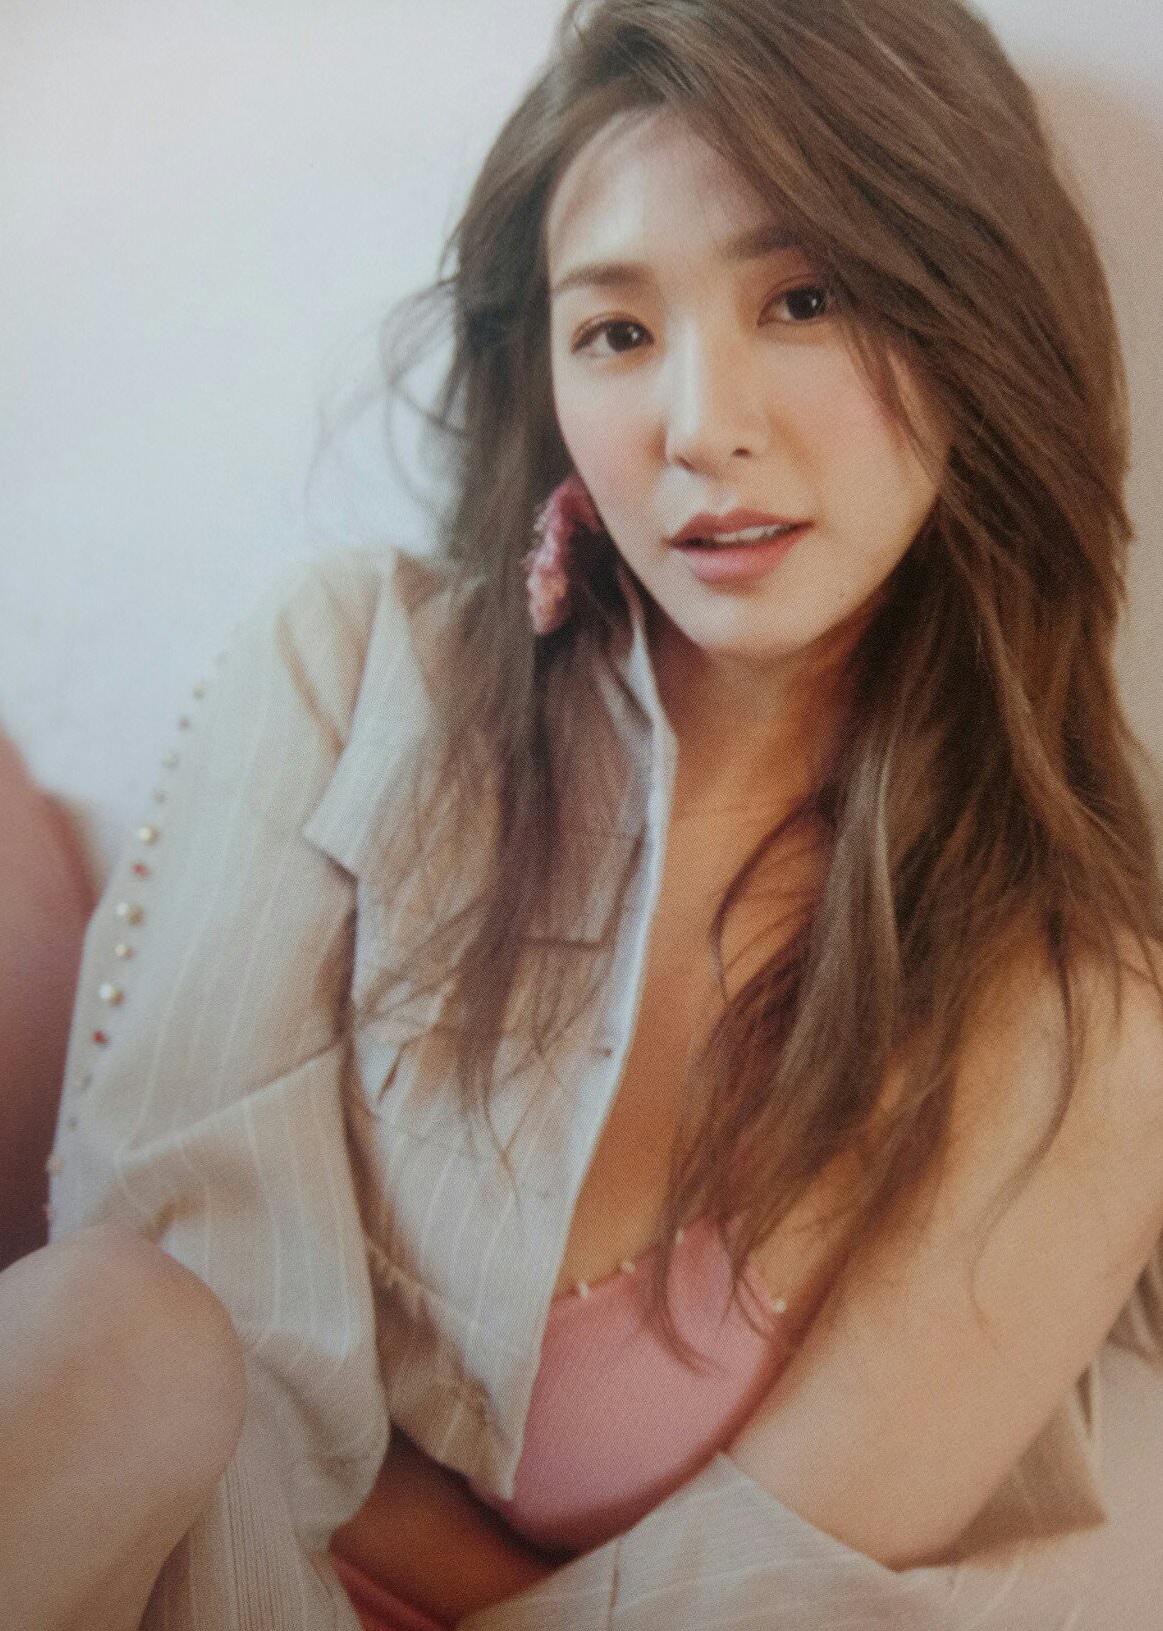 Snsd’s Tiffany Looks Amazing In A Pink Swimsuit For … Uh Whatever This Is Asian Junkie